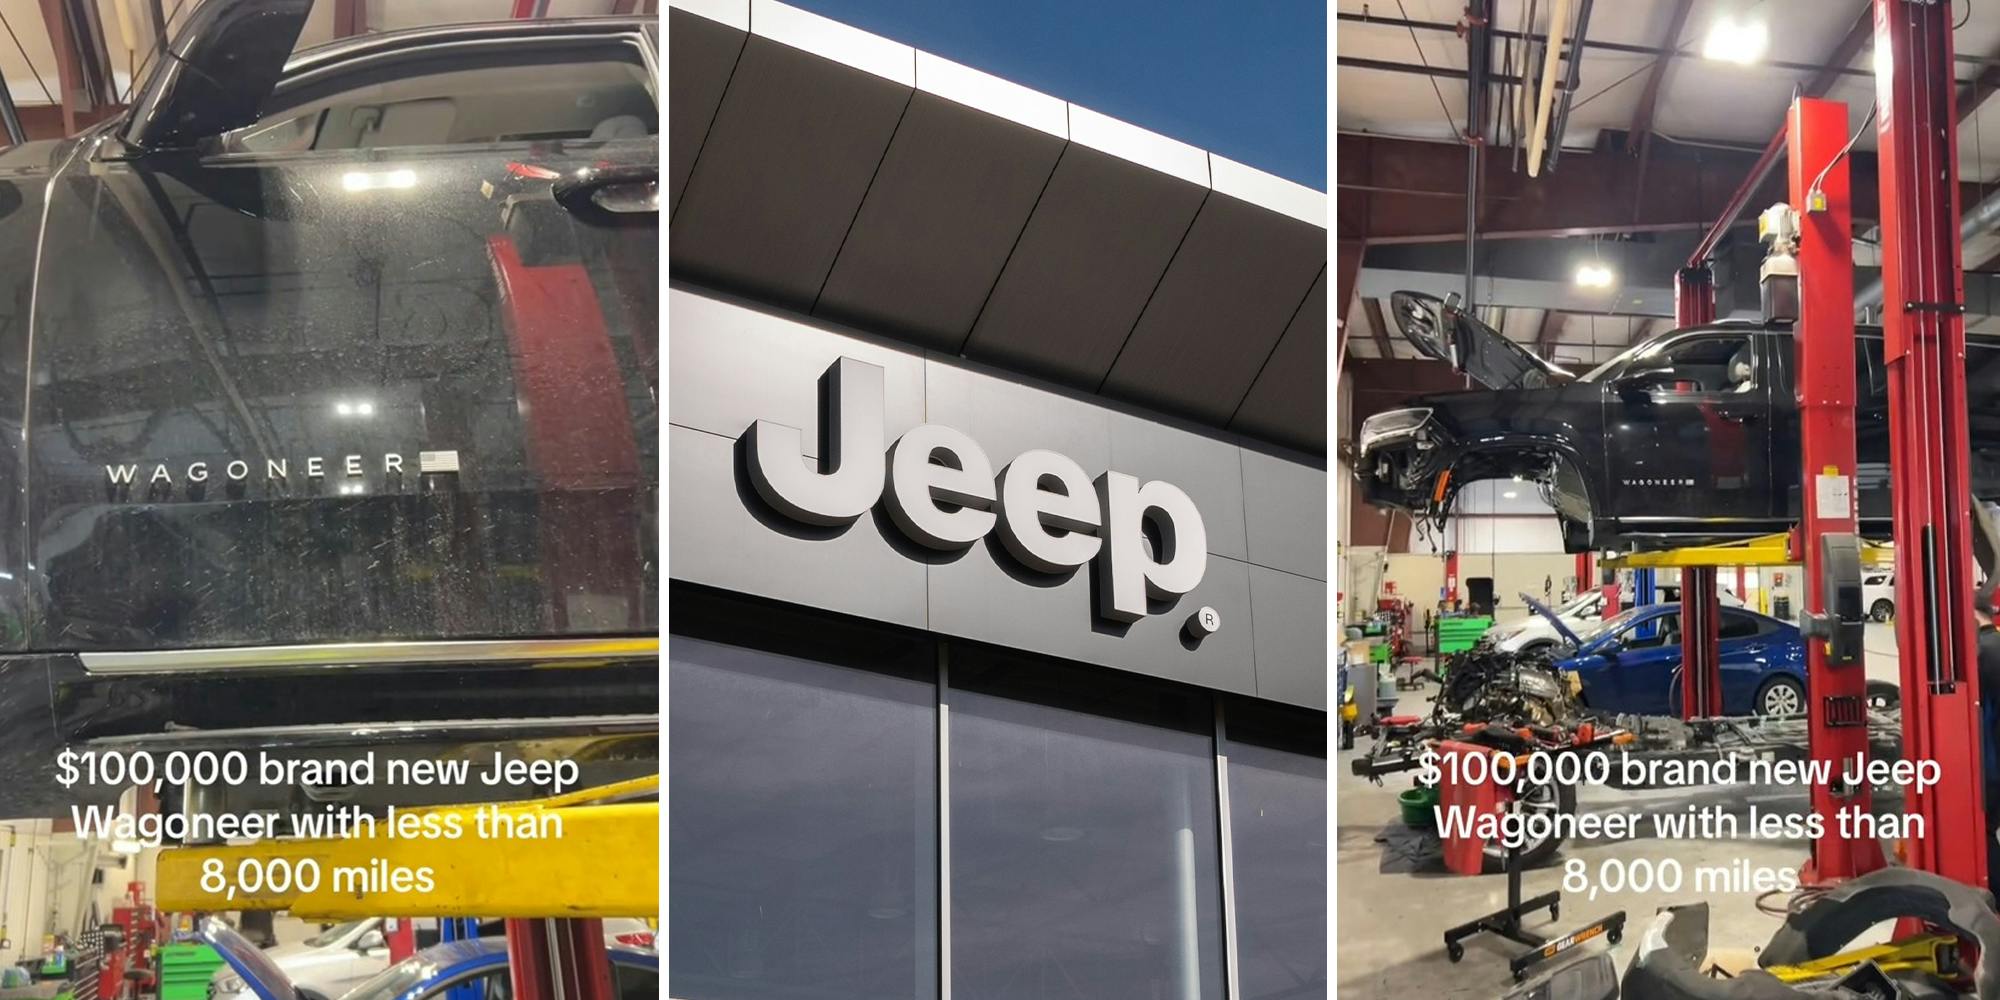 ‘I still don’t know why people keep buying em’: Viewers torn after $100K Jeep with fewer than 8K miles rolls into the shop